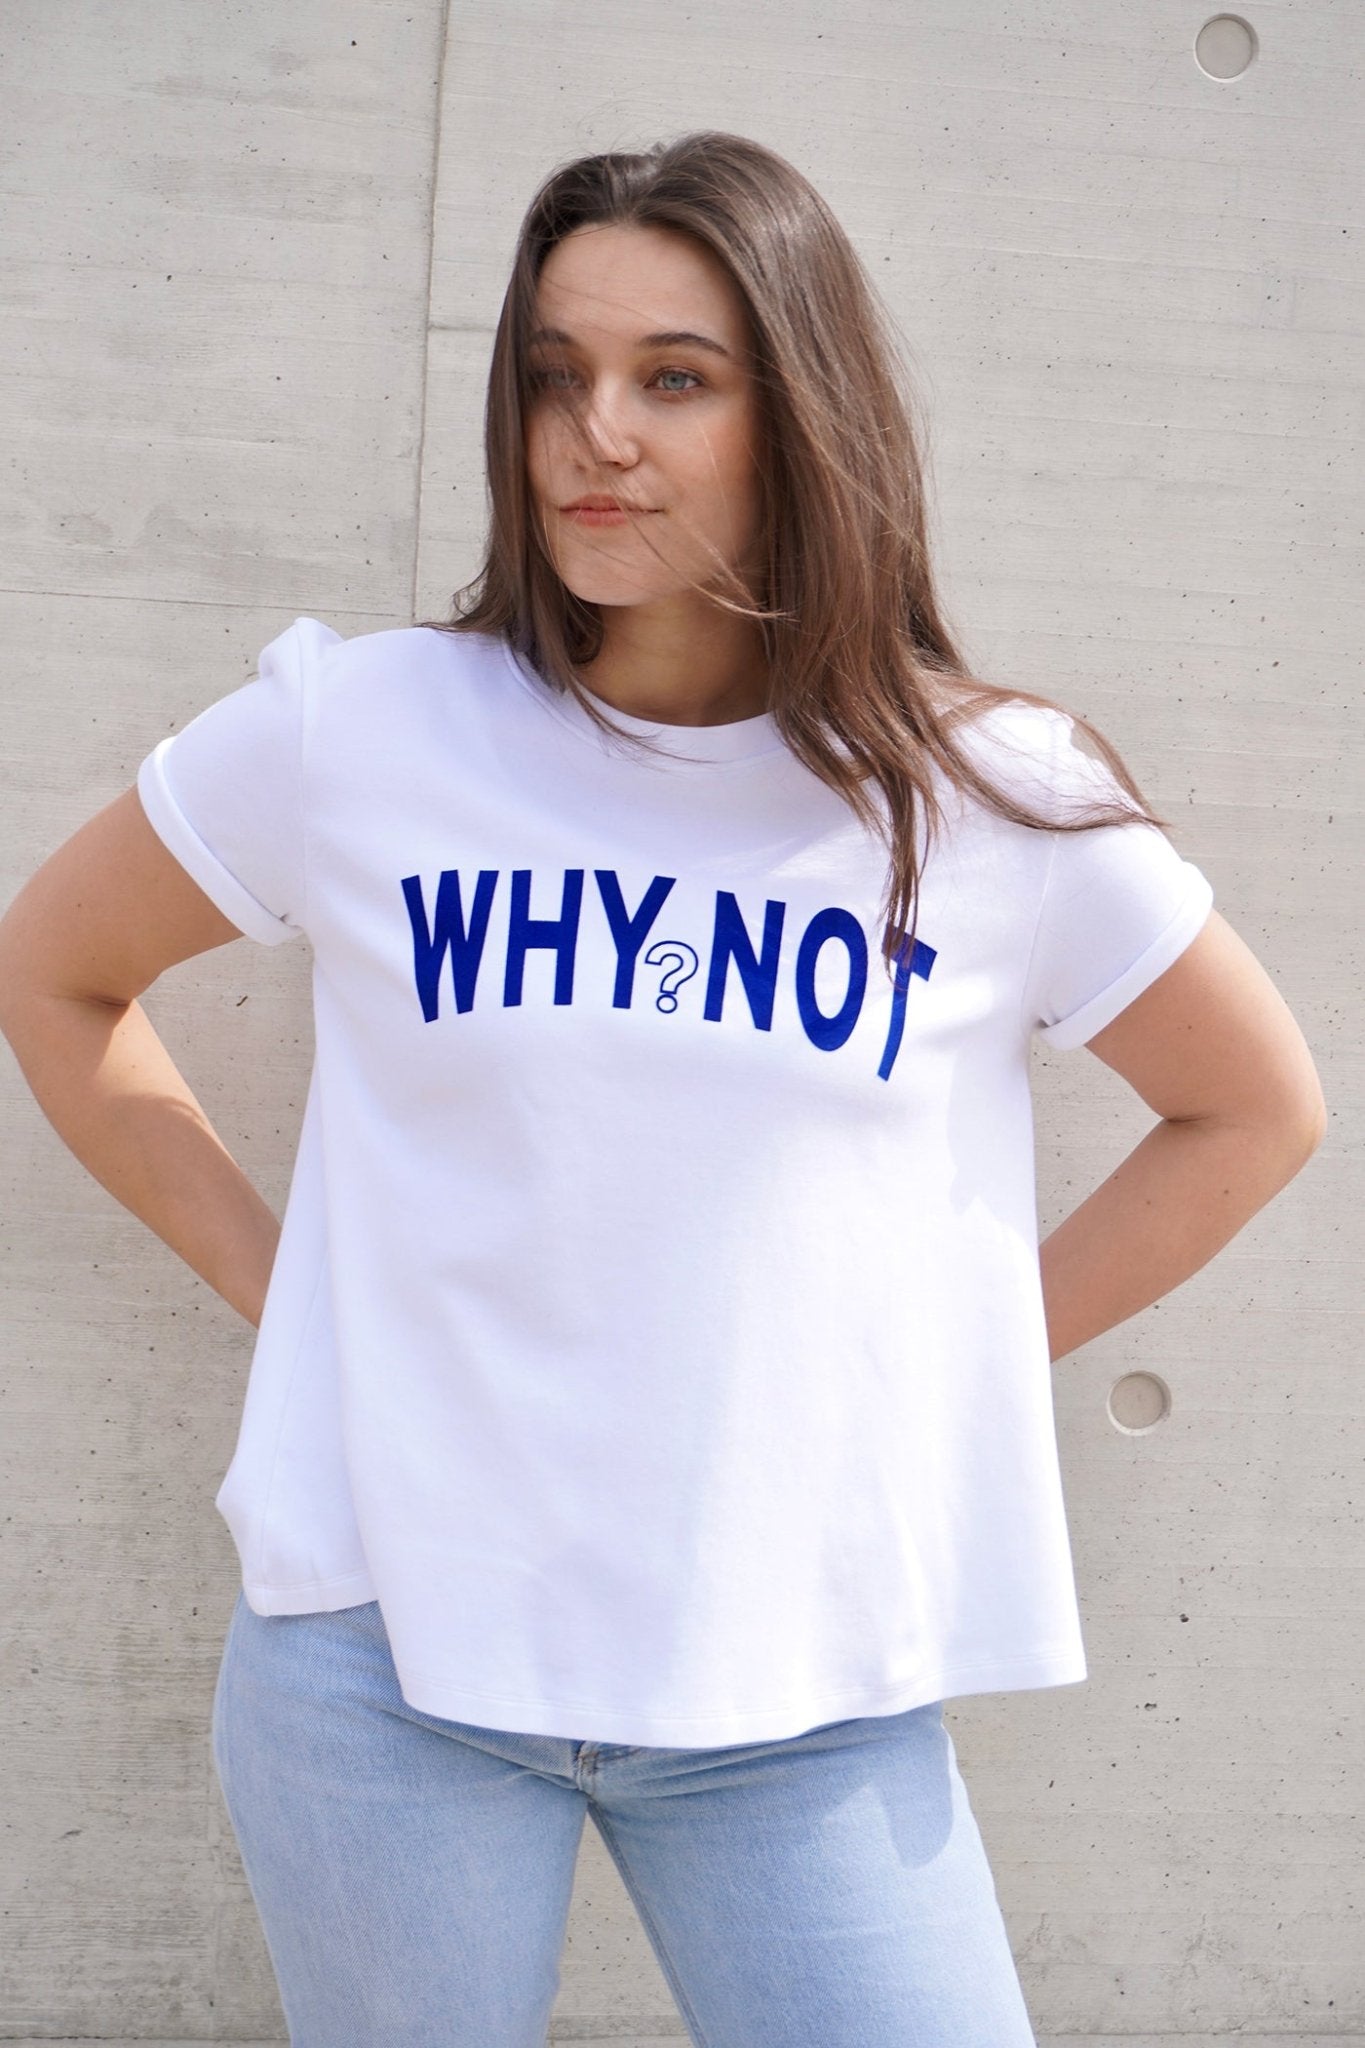 'WHY NOT?' Flowy T-Shirt - OBLIVIOUS?